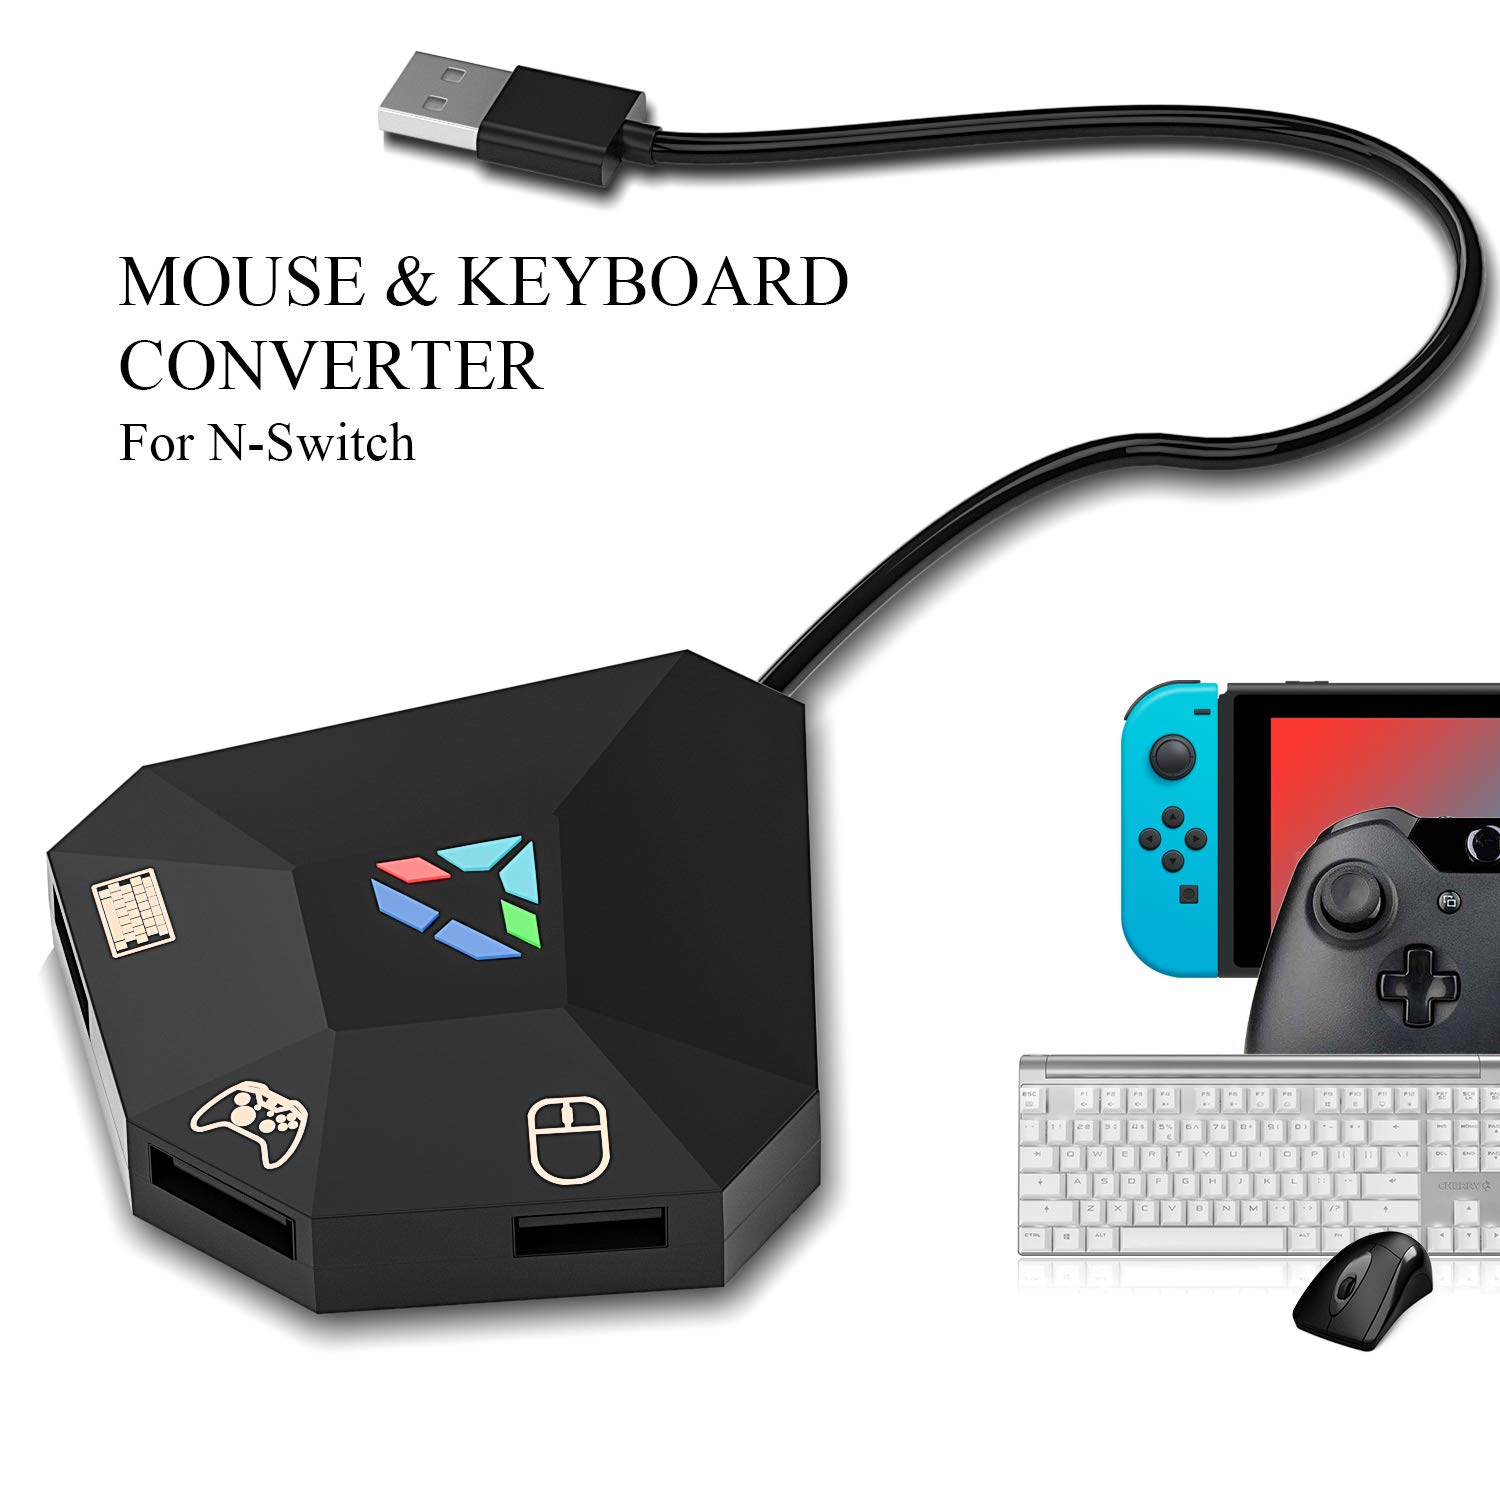 Nintendo Switch with a keyboard and mouse attached